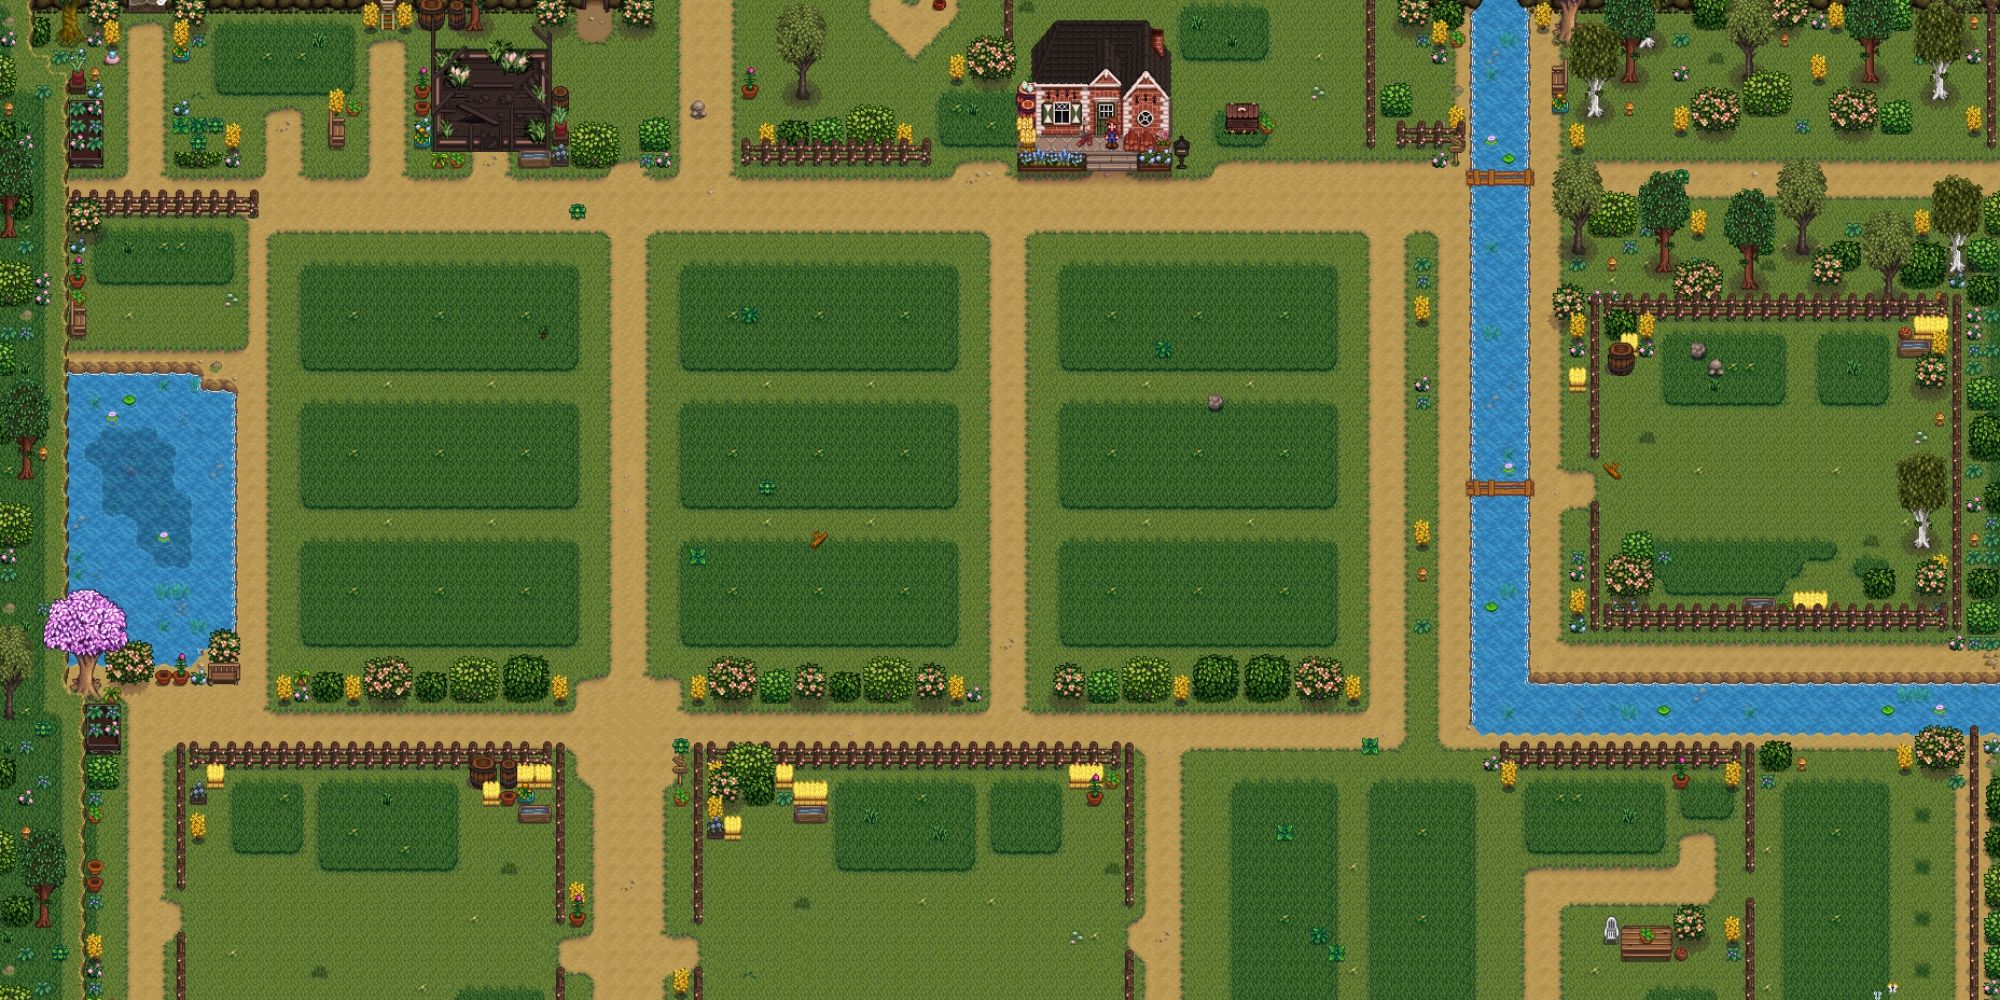 A Stardew Valley farm map that's very organized and well kept